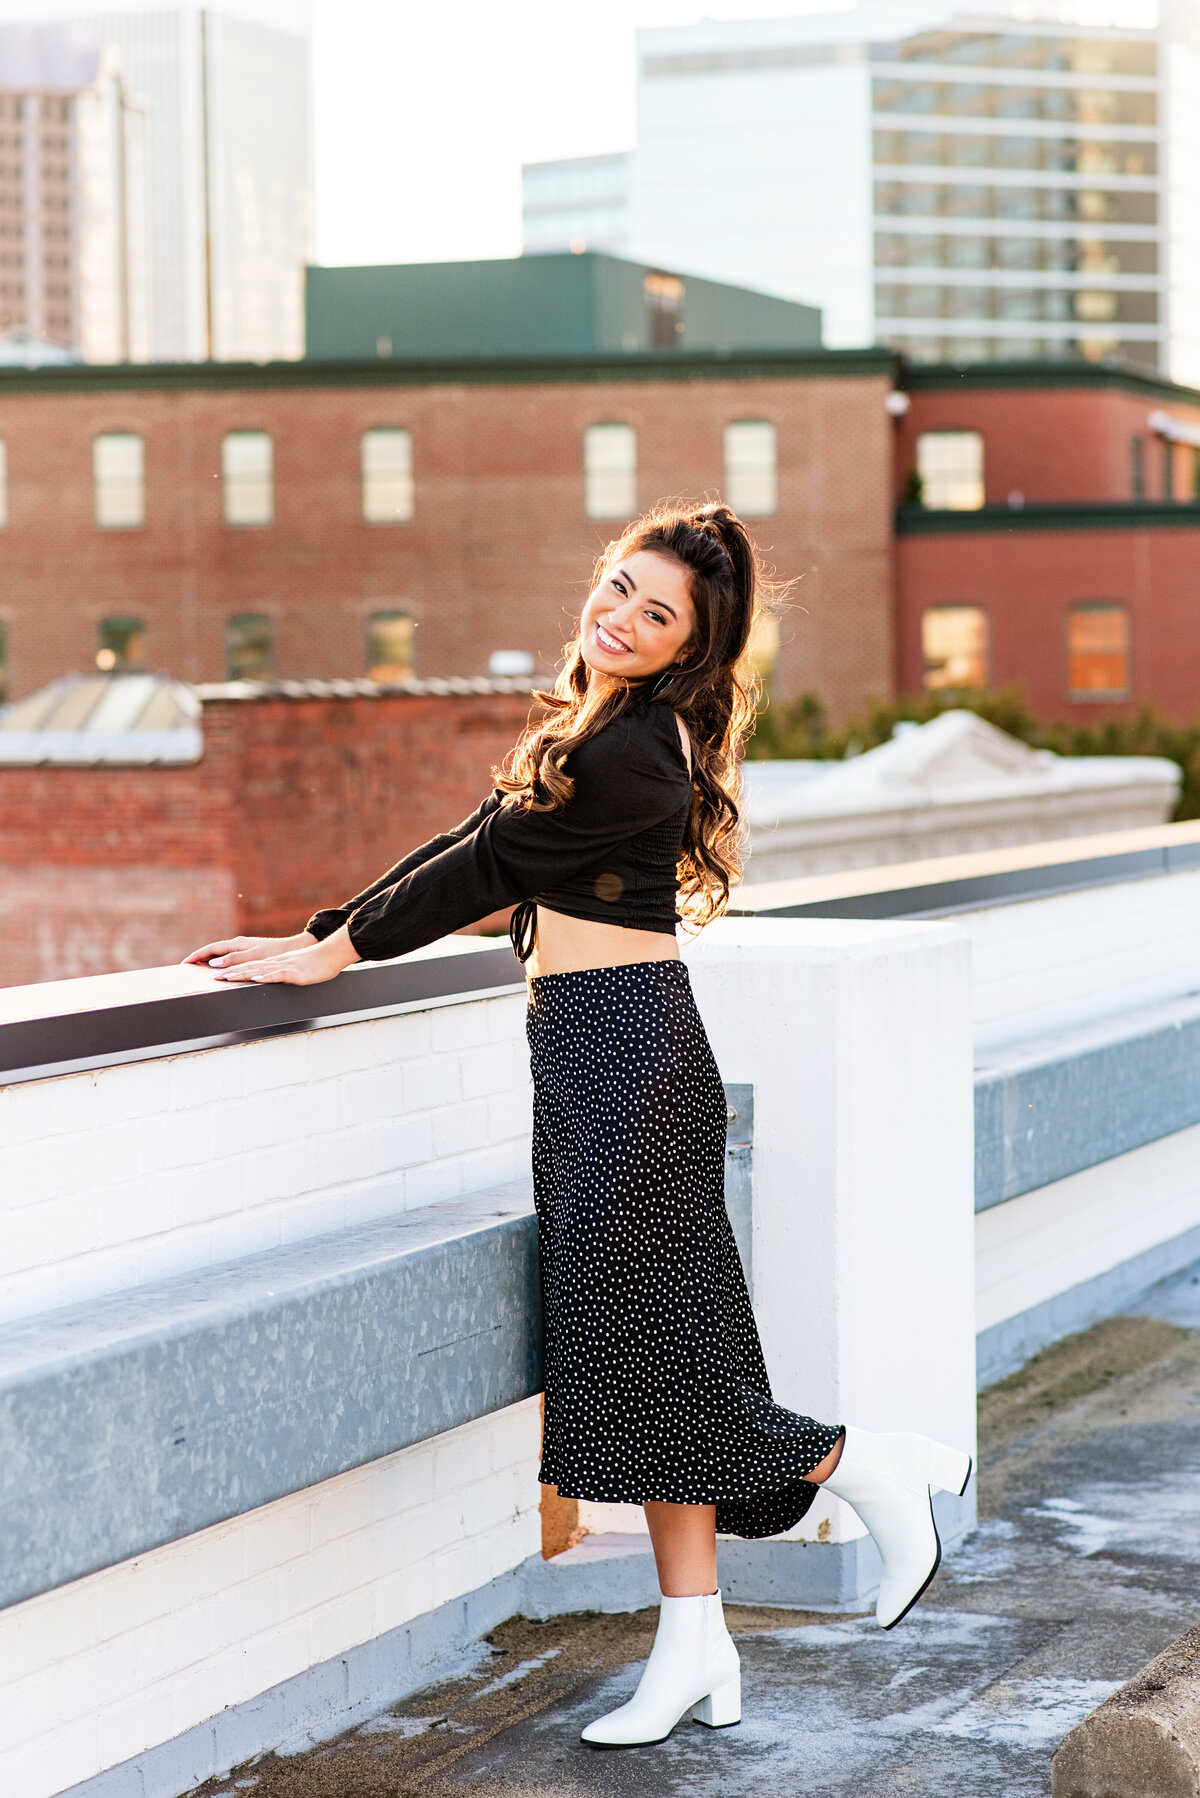 Senior girl poses with one foot up on rooftop at sunset.